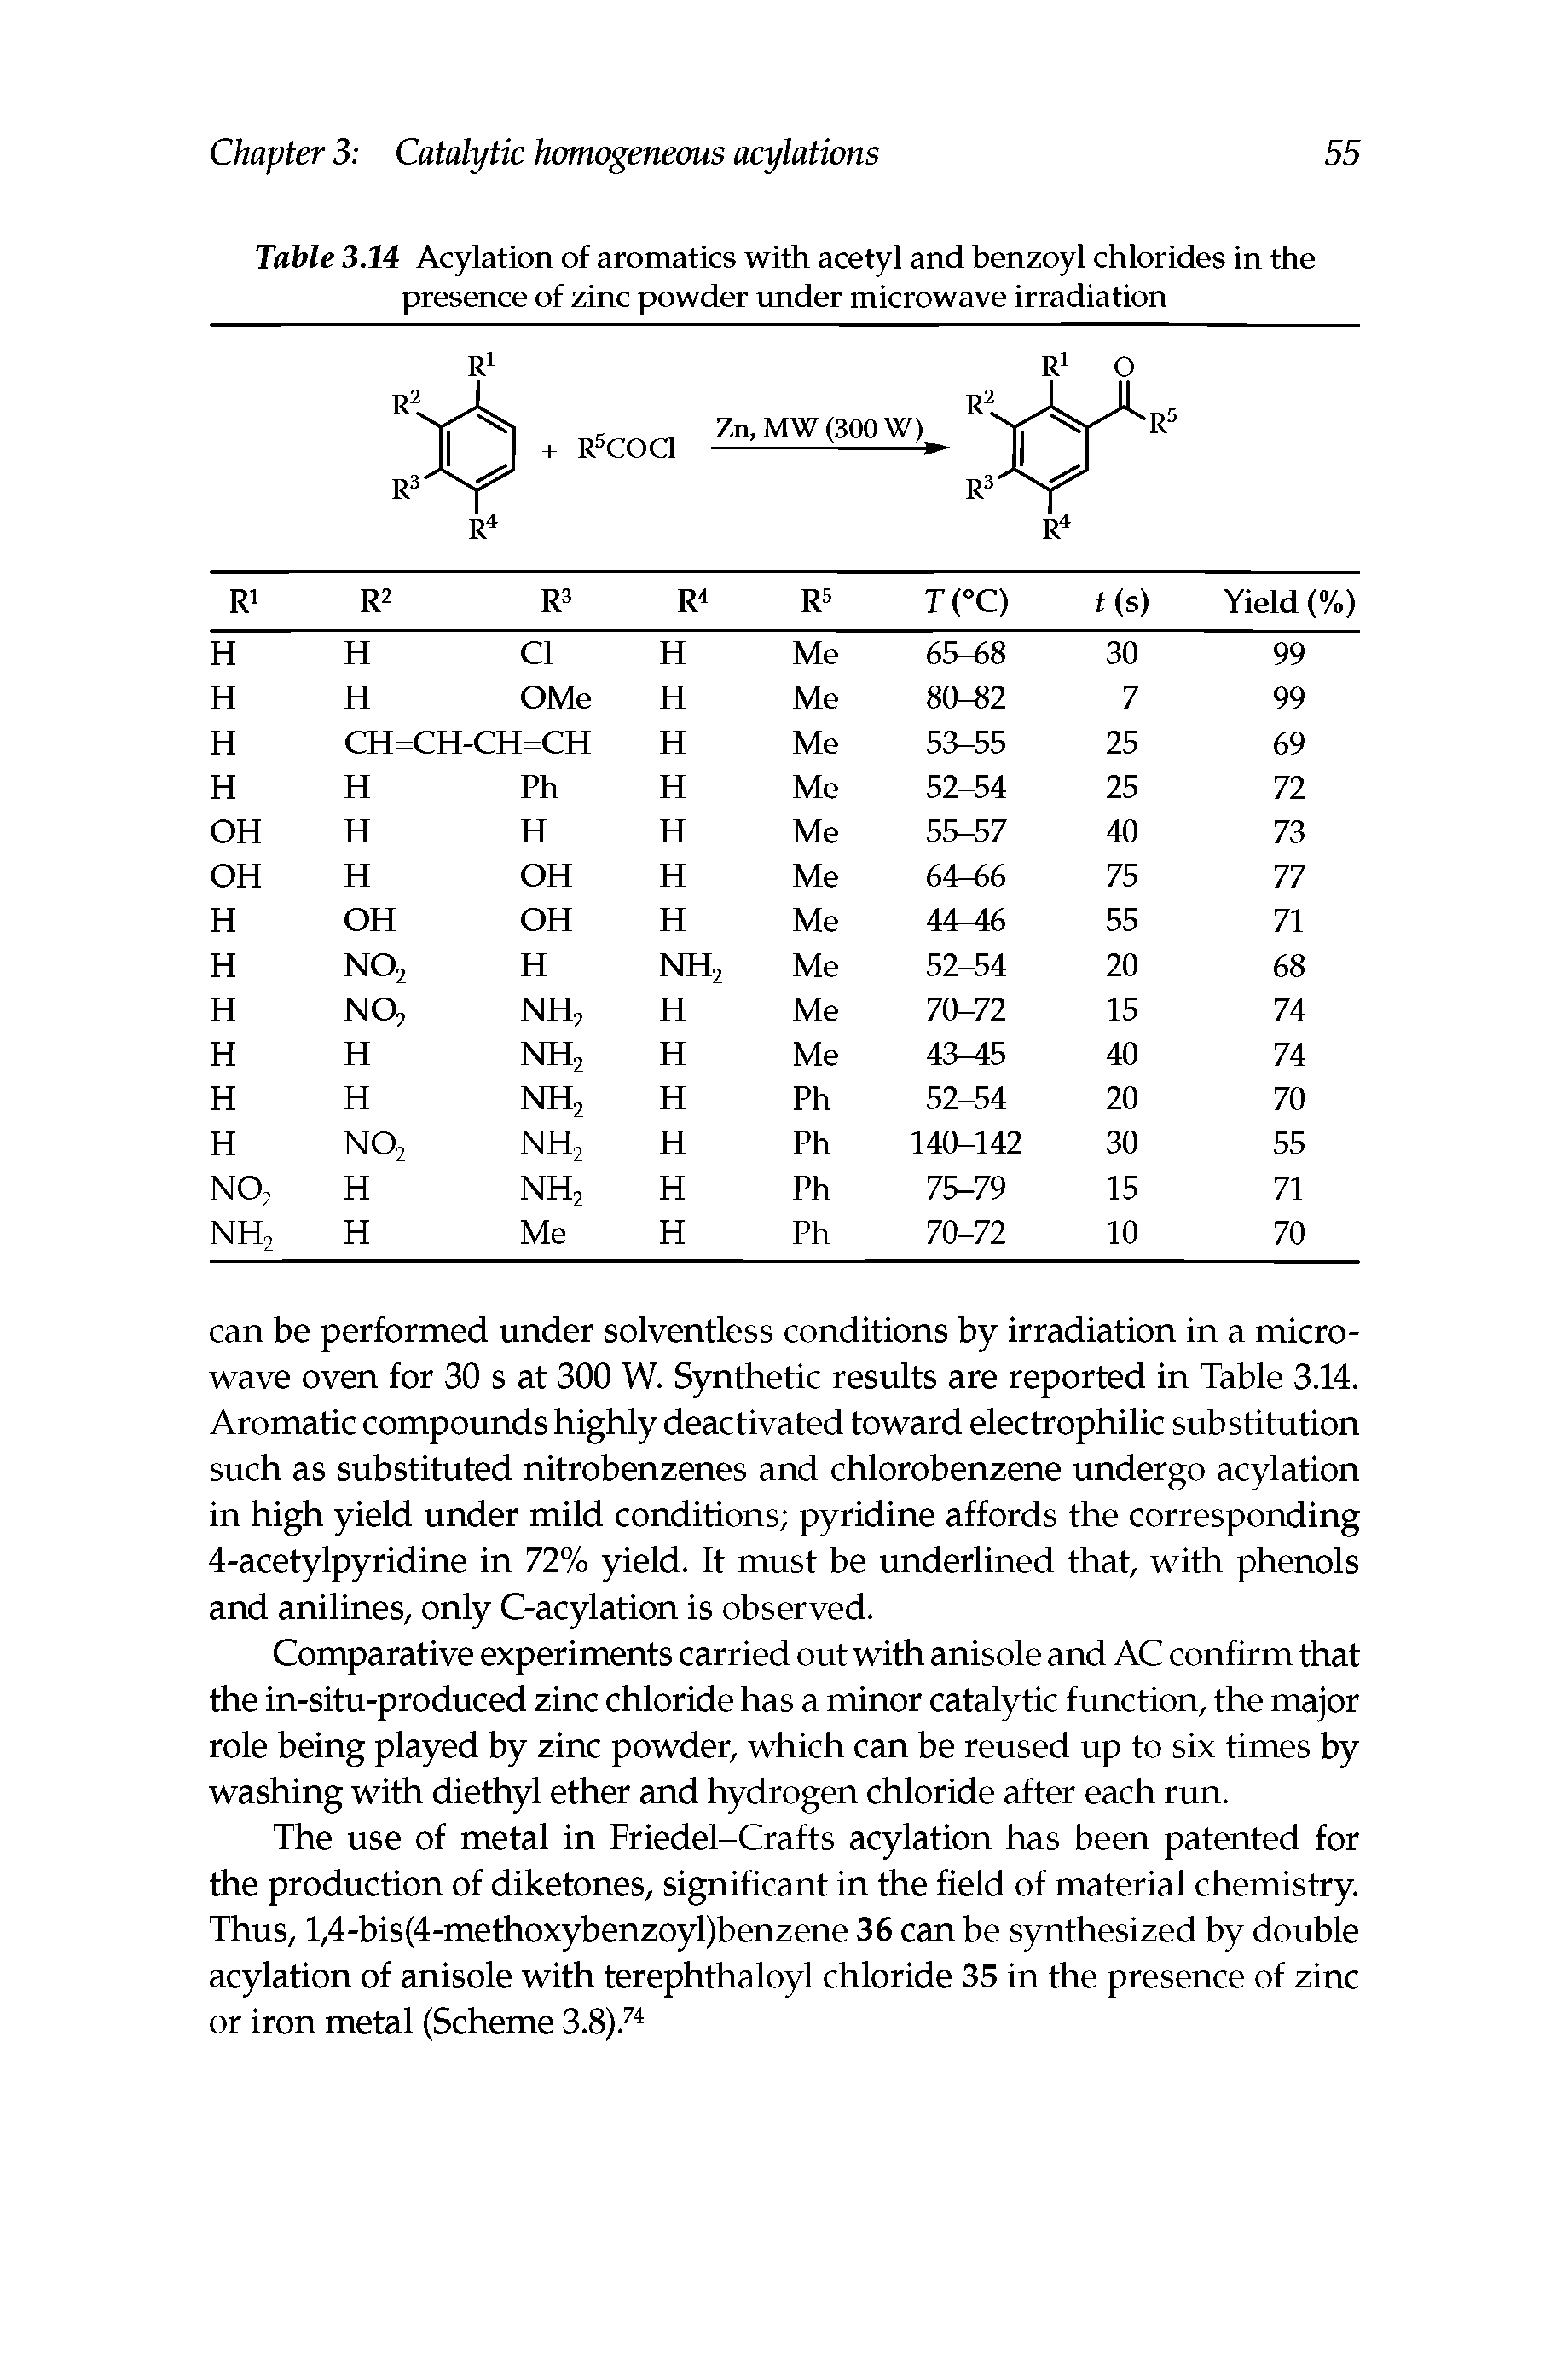 Table 3.14 Acylation of aromatics with acetyl and benzoyl chlorides in the presence of zinc powder under microwave irradiation...